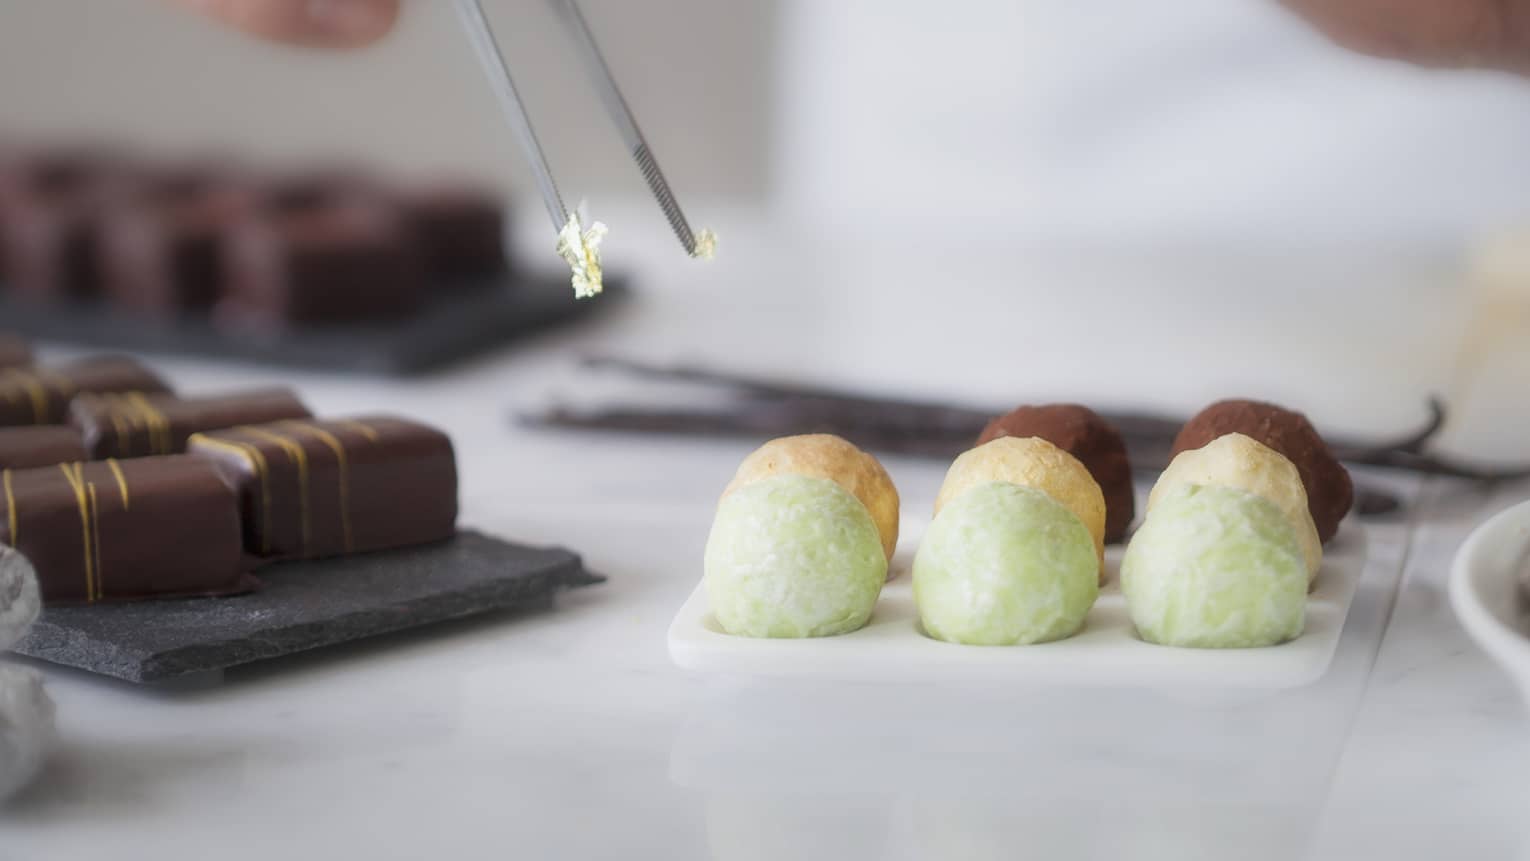 A close up of a male chef's hands using tongs to place various chocolates on parchment paper